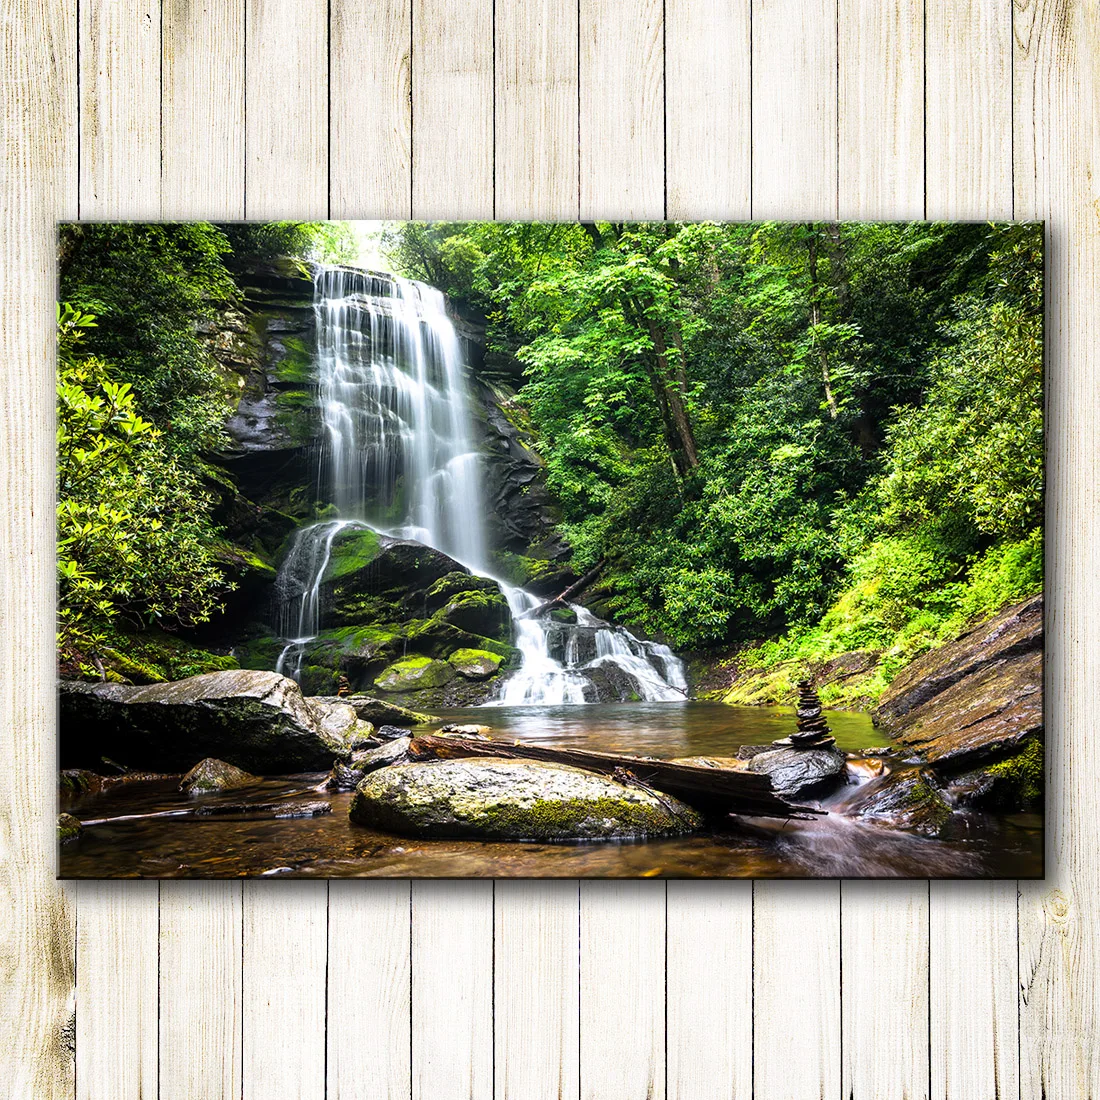 

HDARTISAN Canvas Art Waterfall Forest Trees Rocks Stones Landscape Photo Wall Picture For Living Room Home Decor